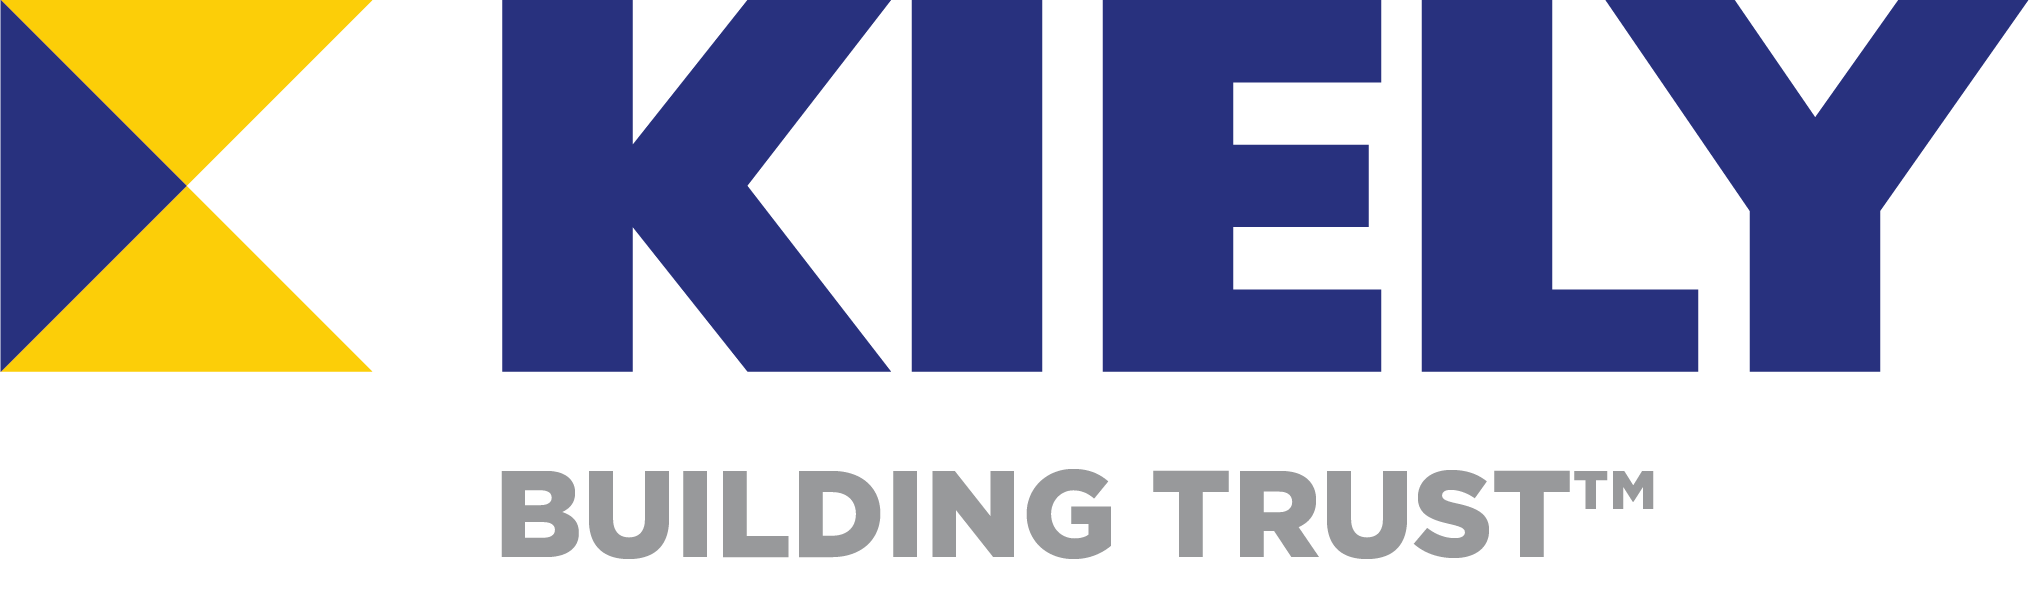 Kiely logo in blue and yellow with gray text beneath reading building trust, followed by a trademark symbol.